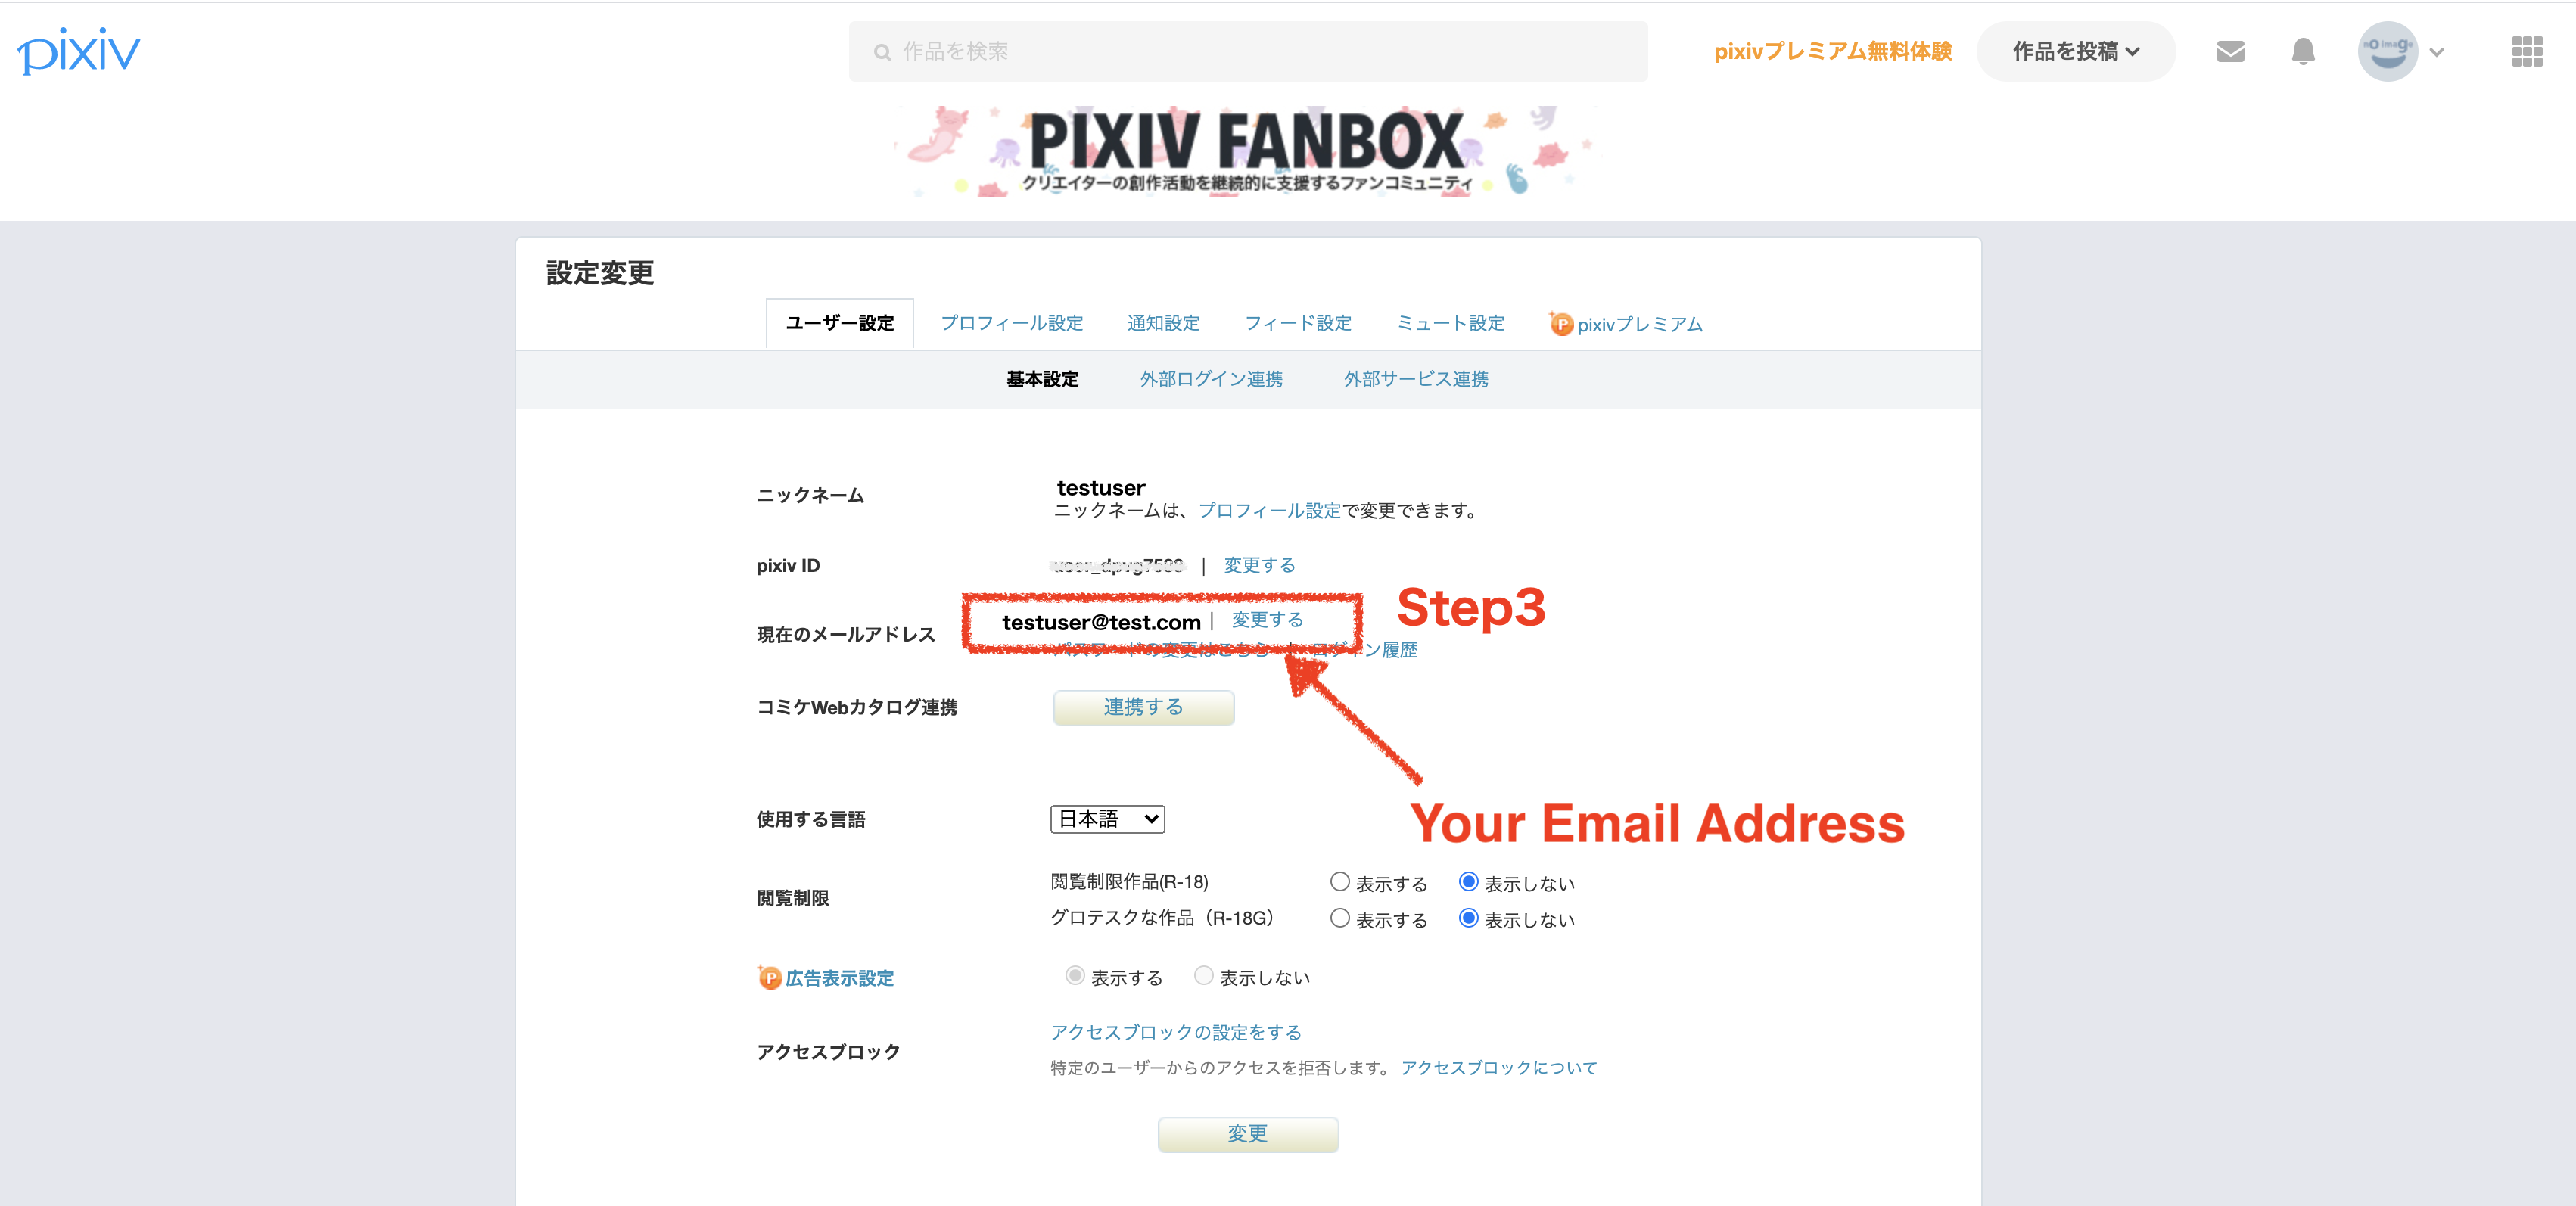 How To Delete A Pixiv Account